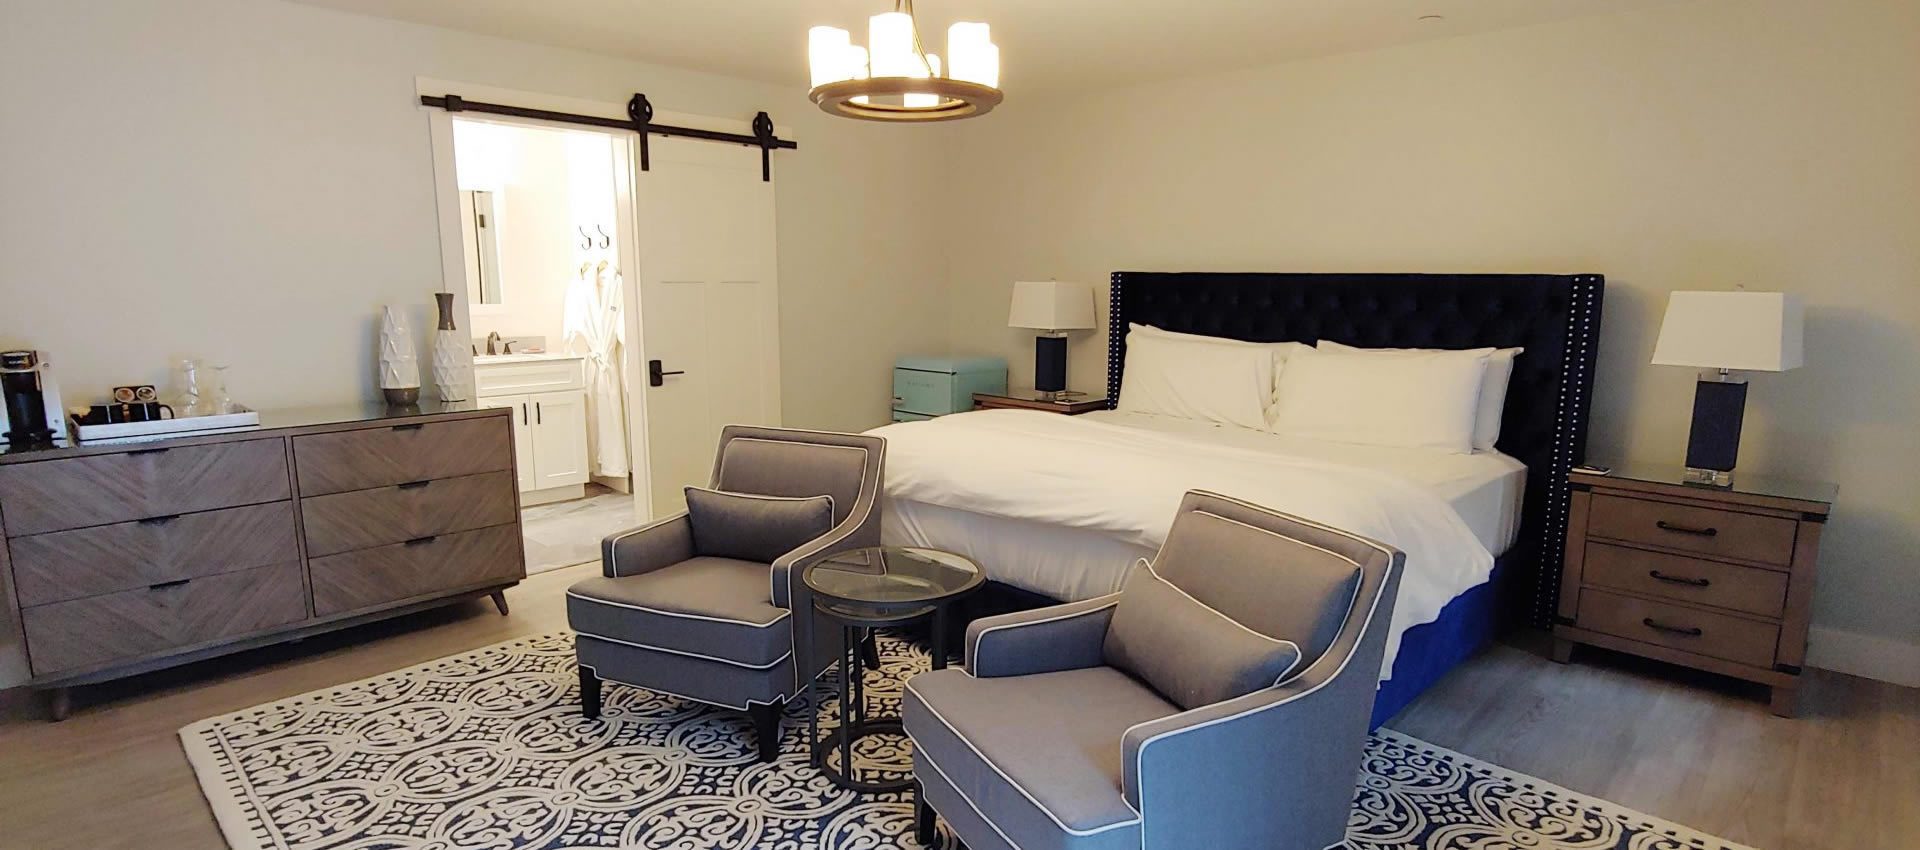 Suite Getaway bed with sitting area chairs